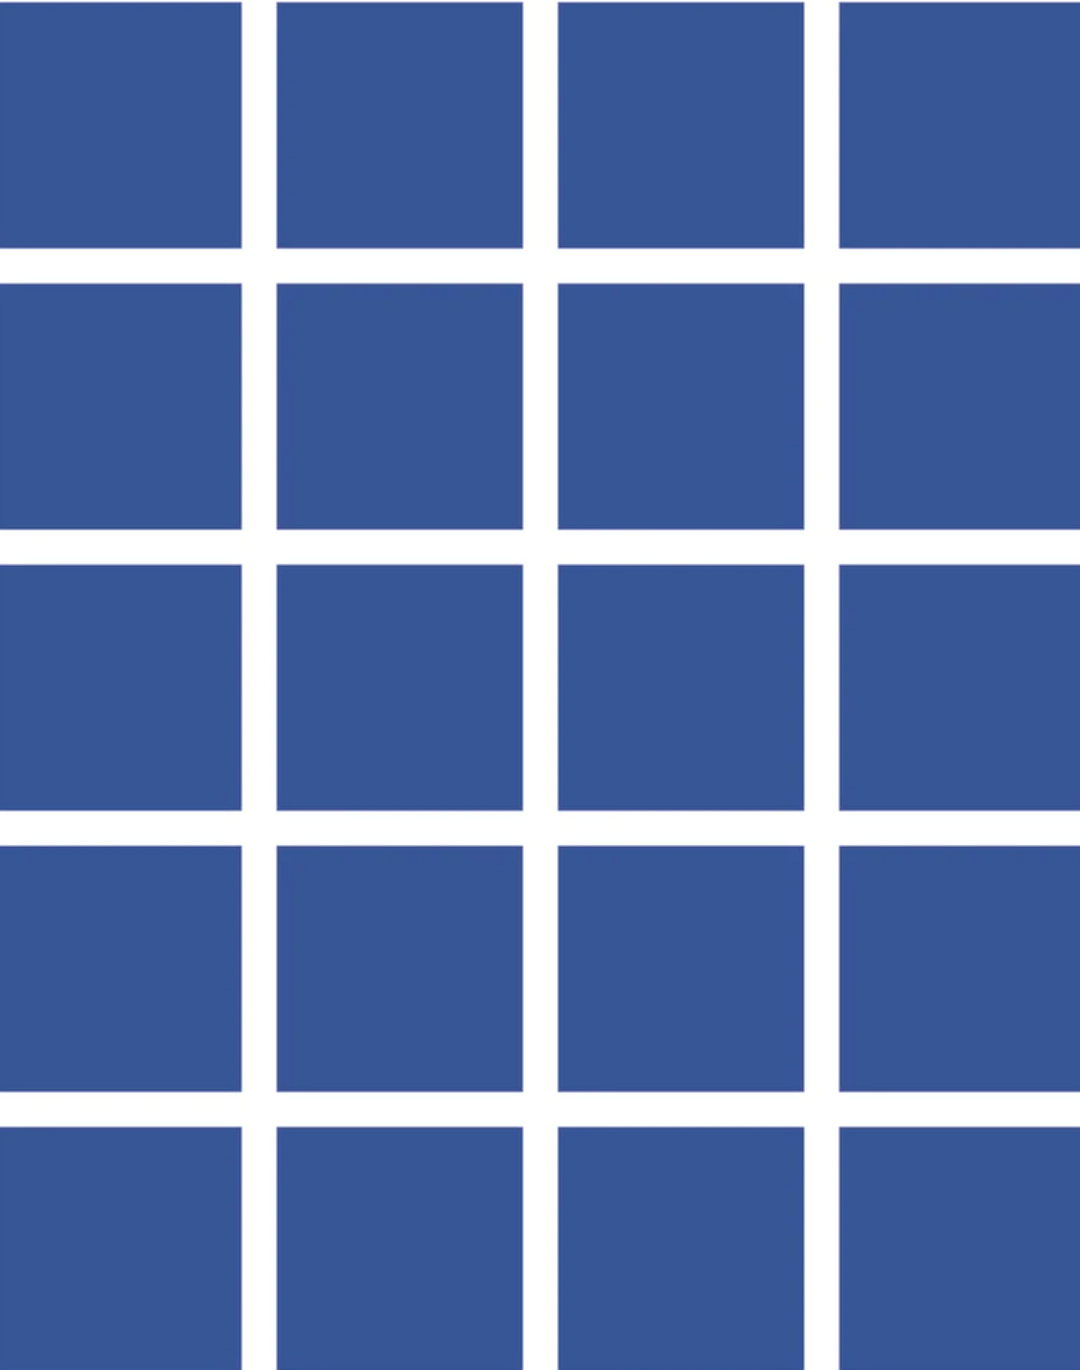 Grid - Small Bold, Line: White | Background: Blue